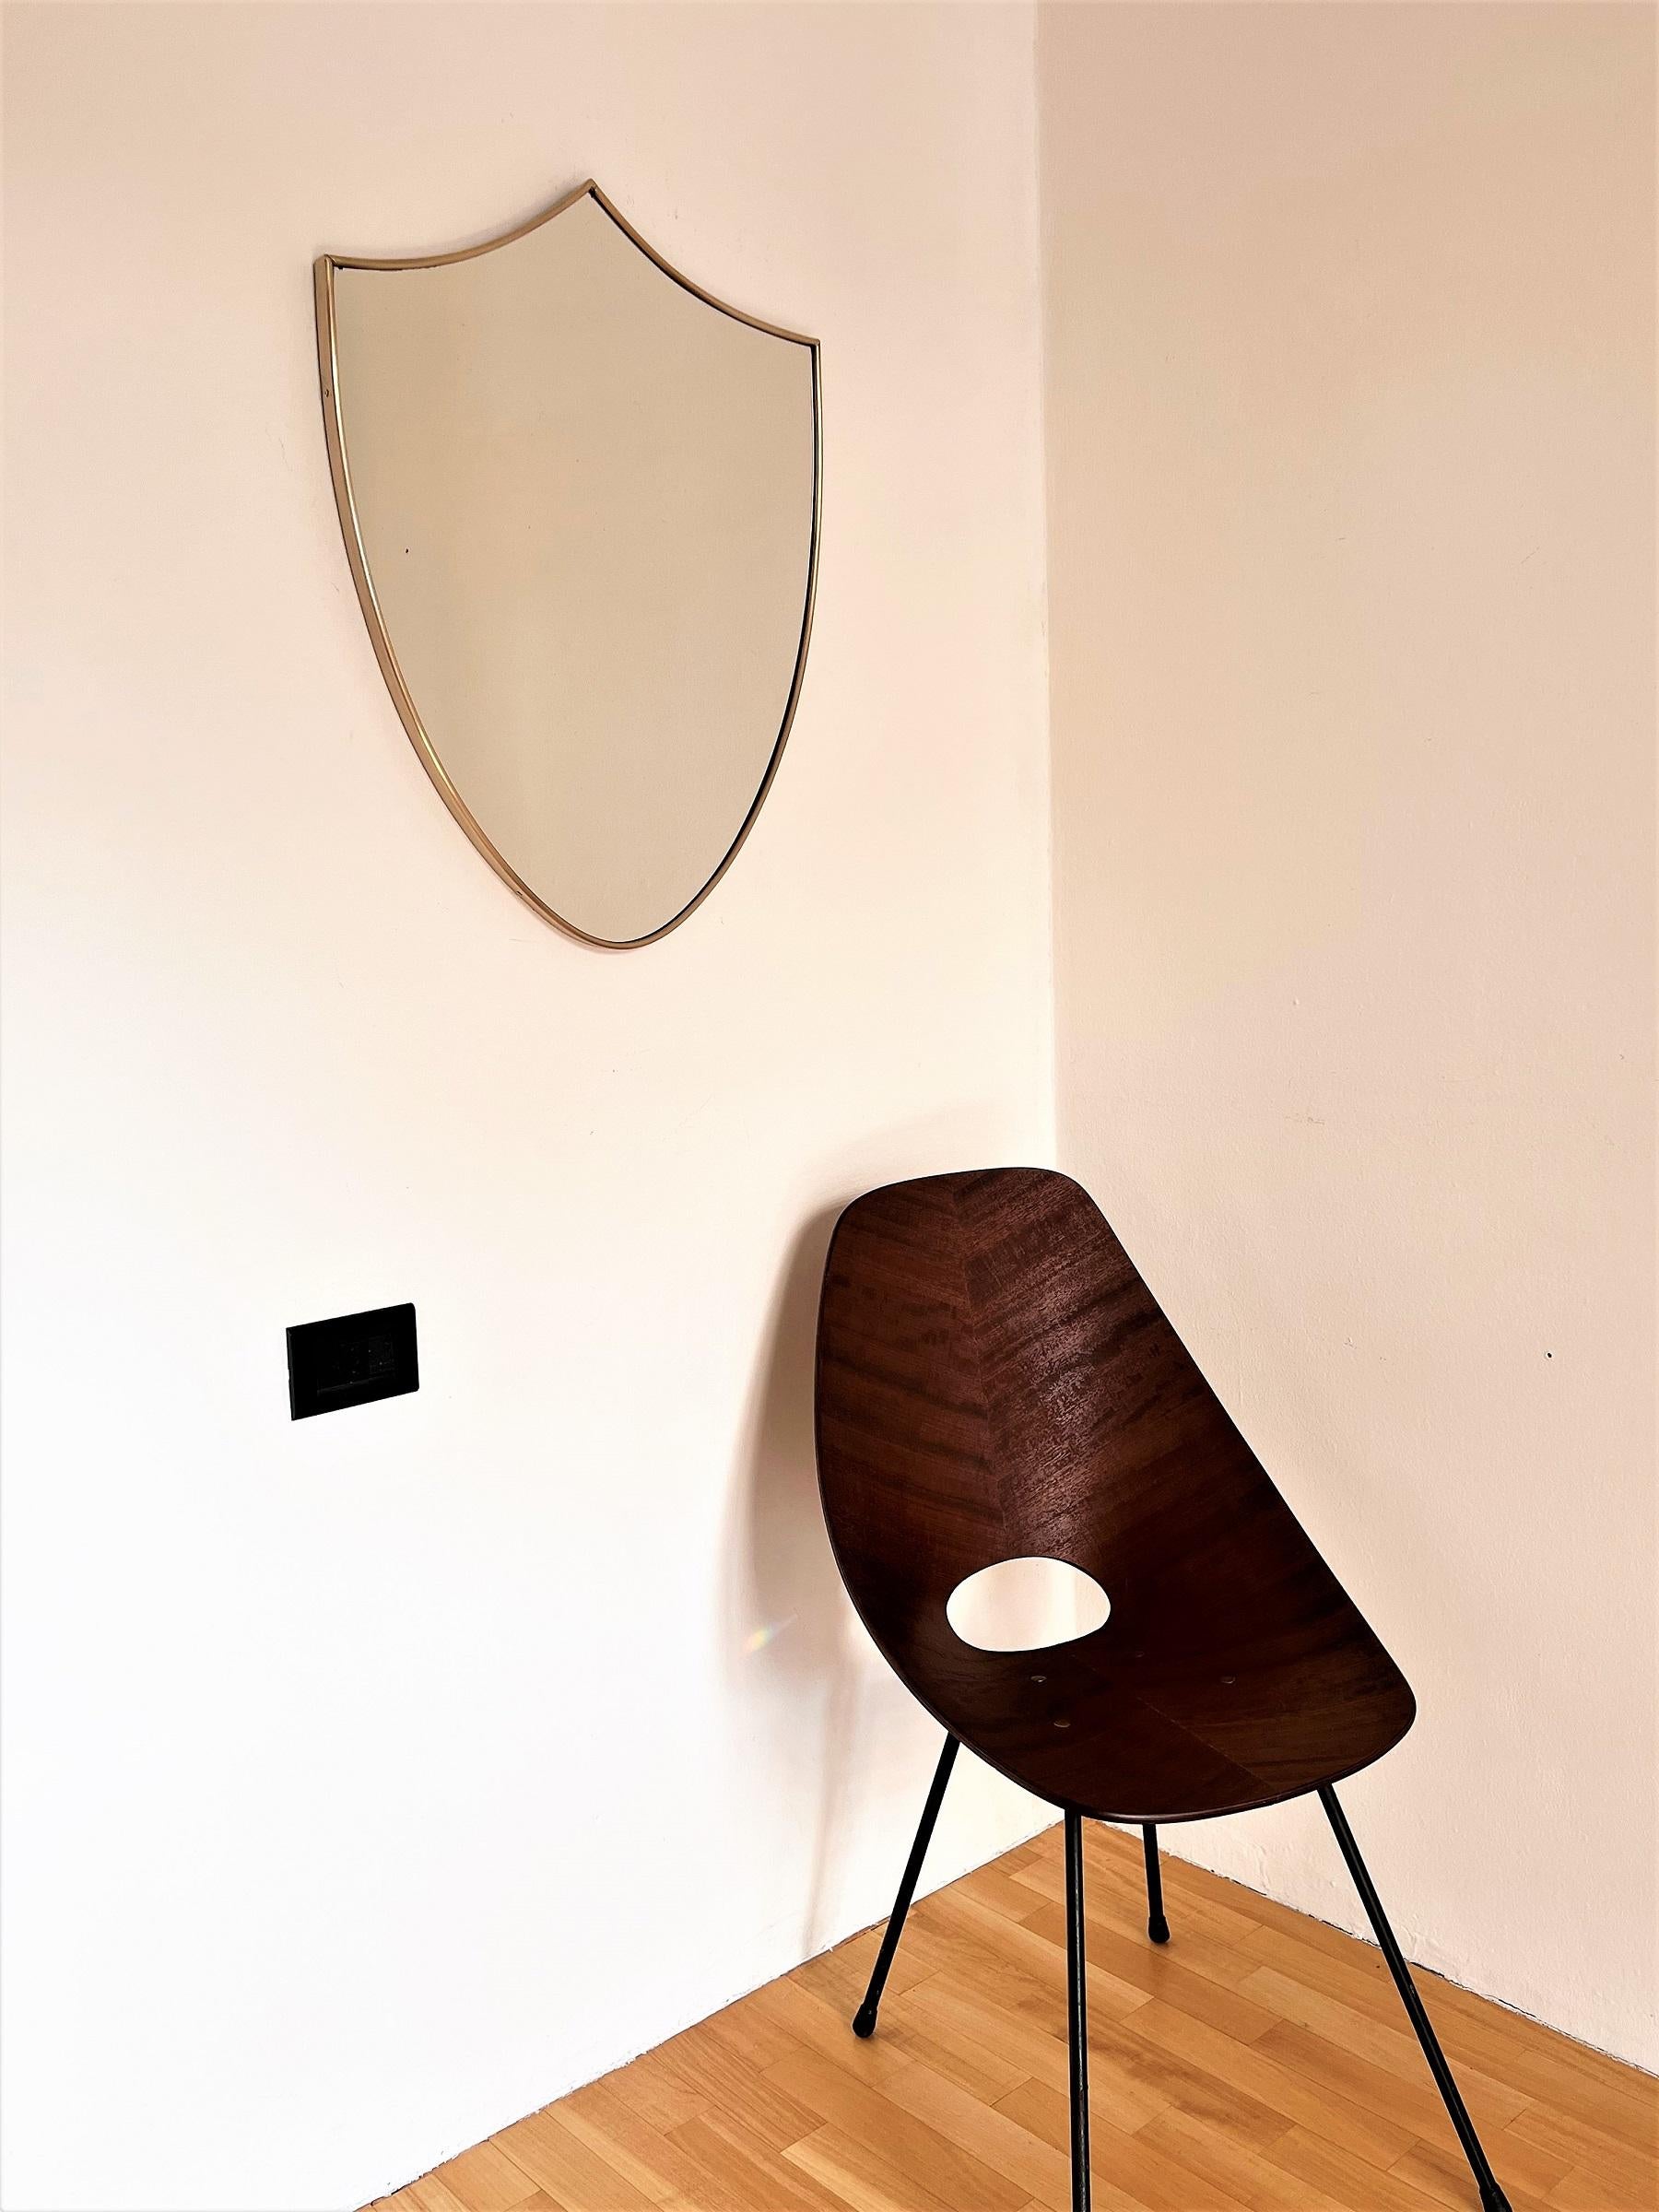 Italian Midcentury Wall Mirror with Brass Frame, 1970s For Sale 2